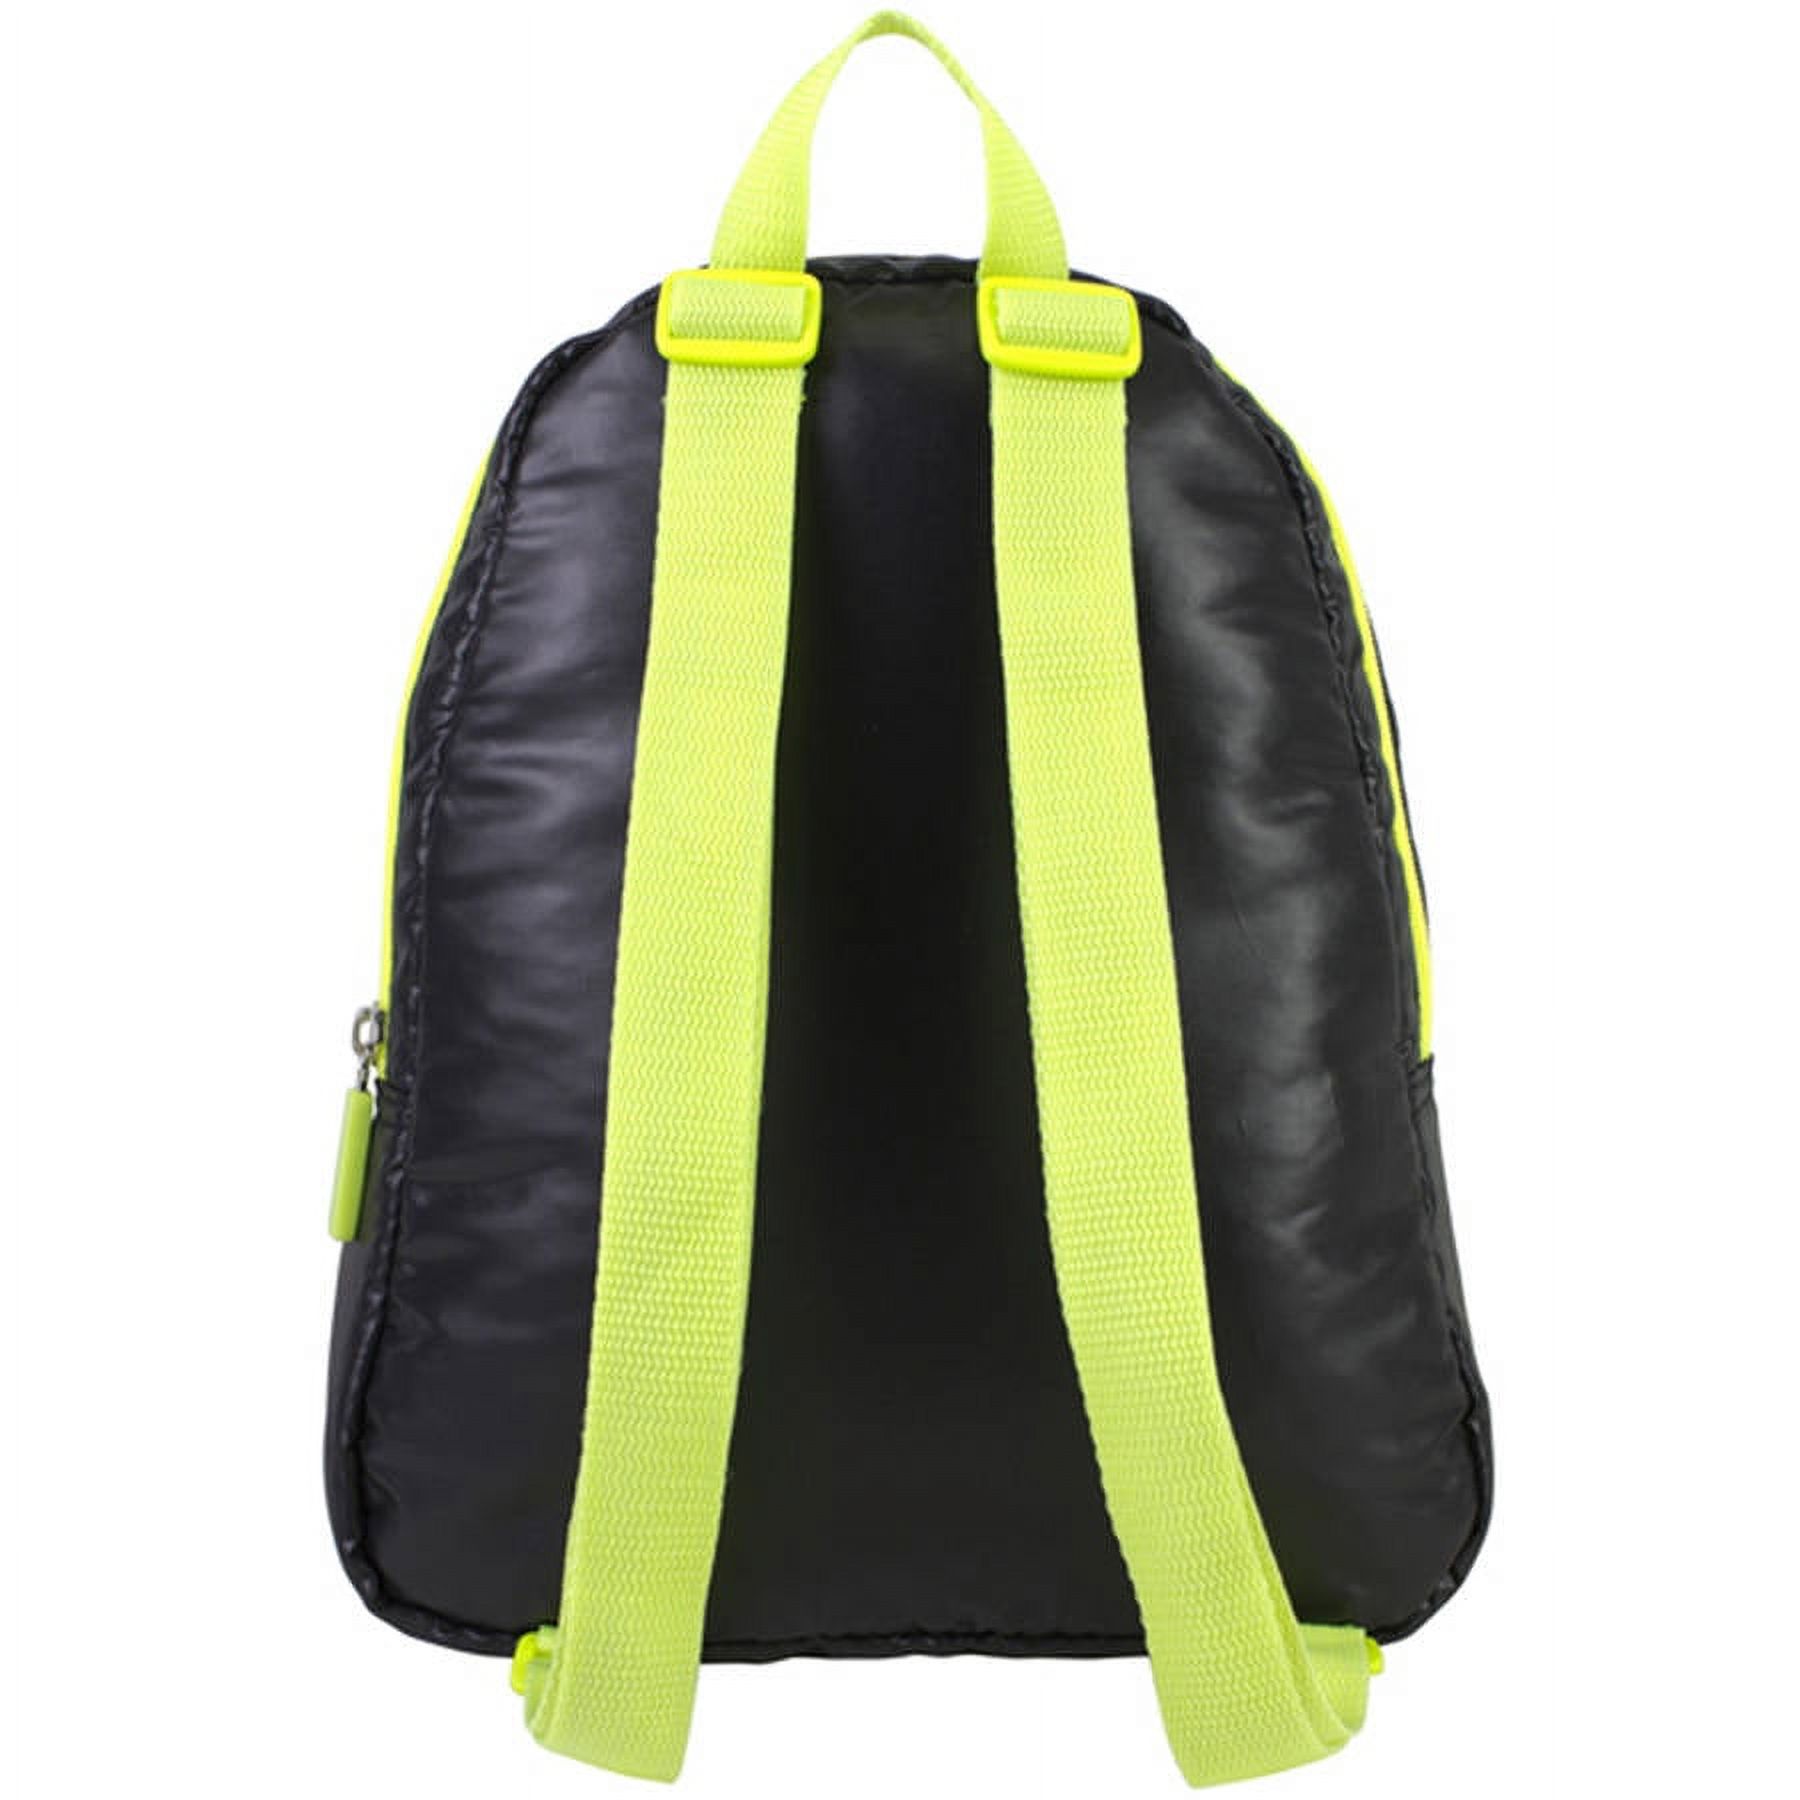 Fuel Ultra Lite Puffy Mini Backpack - image 4 of 4